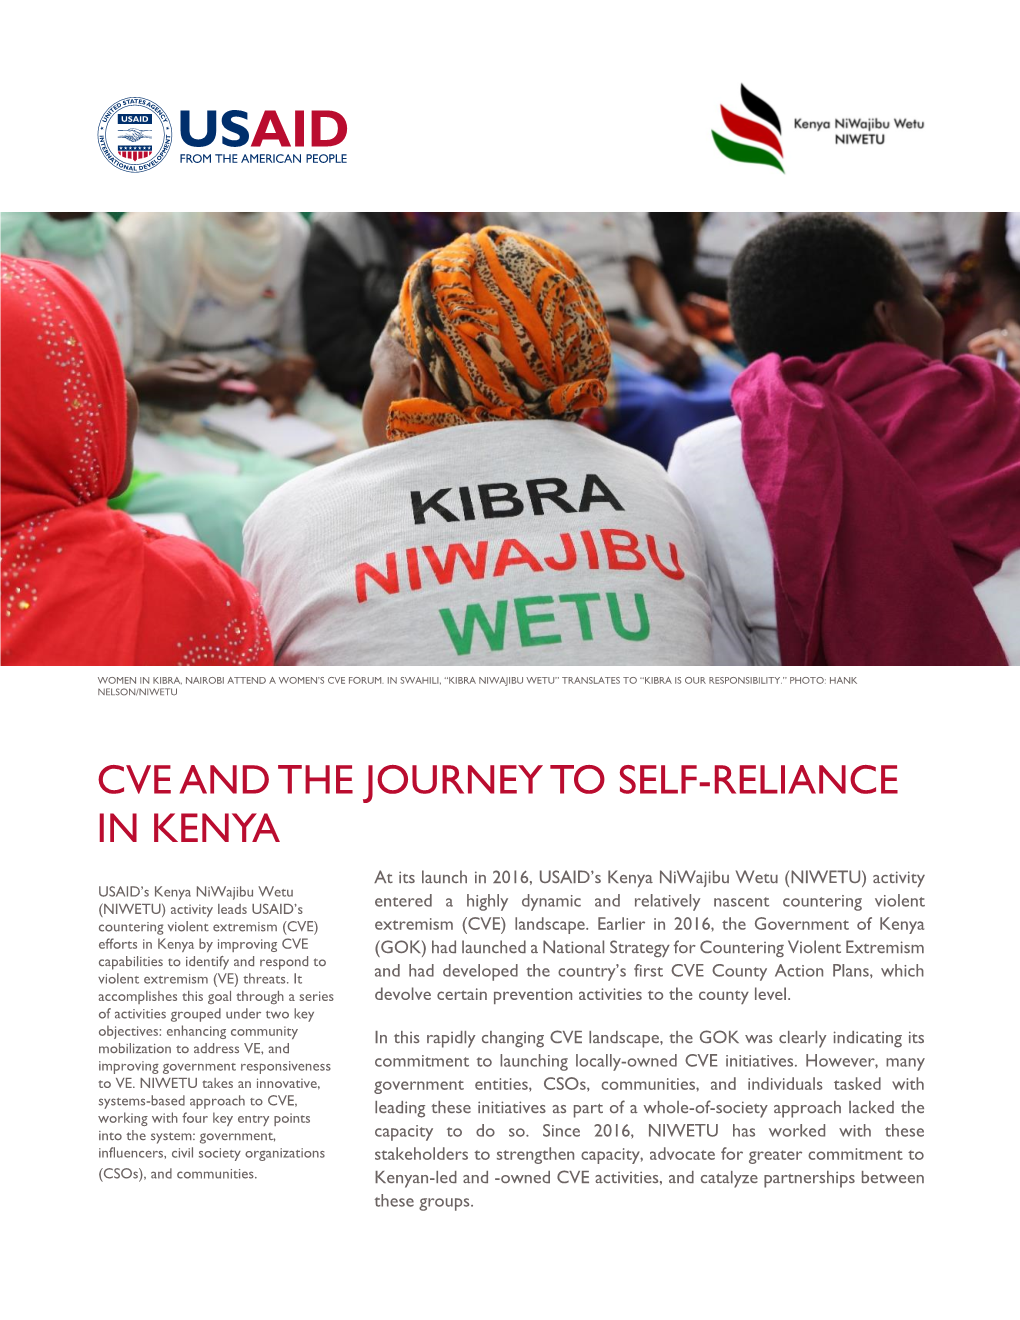 Cve and the Journey to Self-Reliance in Kenya